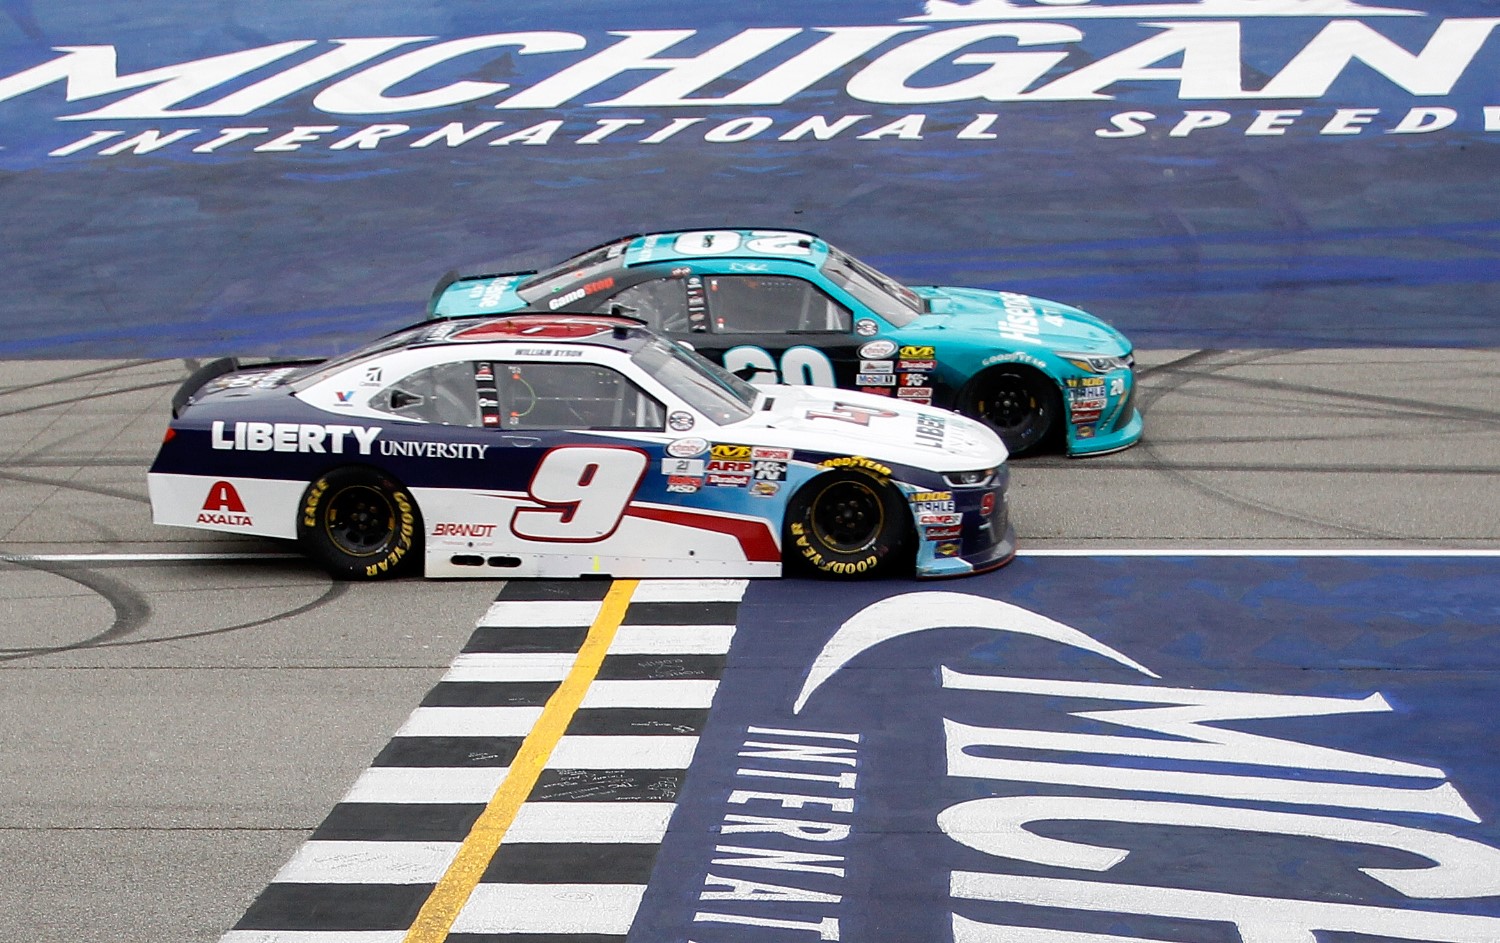 Denny Hamlin edges William Byron to the line to win the Irish Hills 250 by 0.012 second, the closest NASCAR XFINITY Series win at Michigan International Speedway